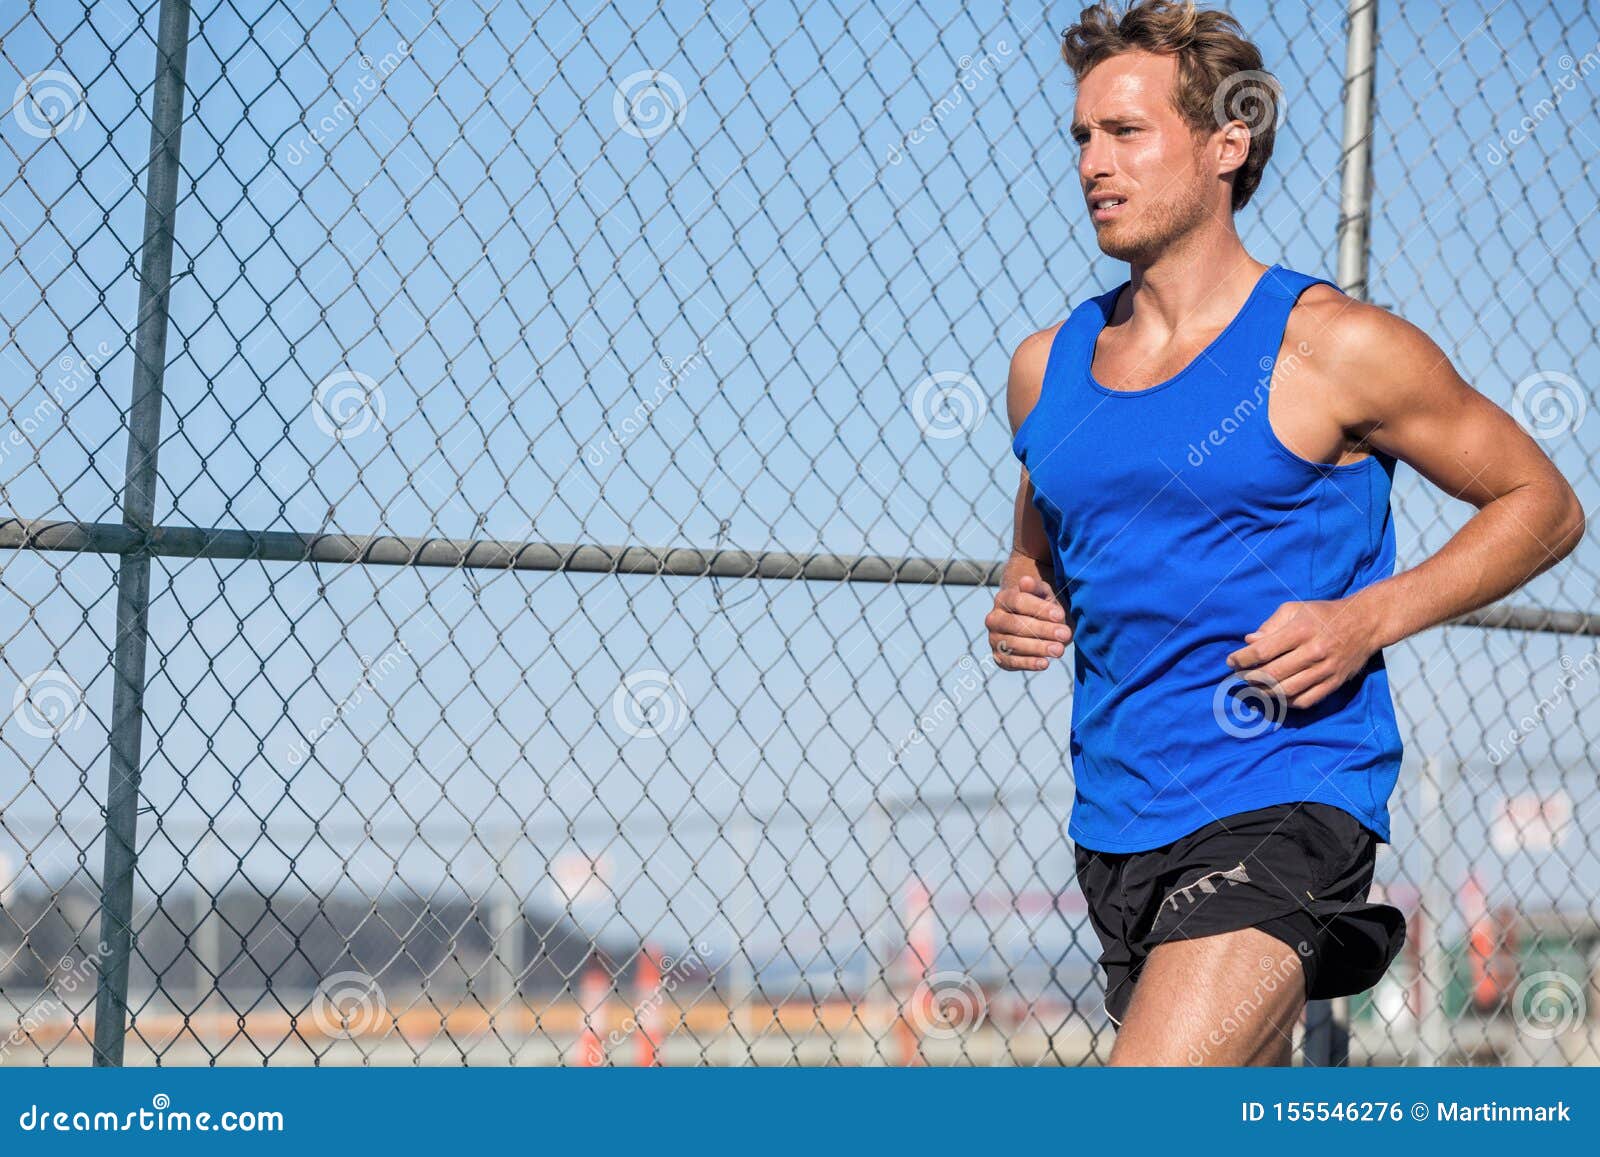 healthy-athlete-runner-man-urban-city-lifestyle-young-sports-male-running-grunge-fence-background-outdoors-summer-wearing-blue-155546276.jpg